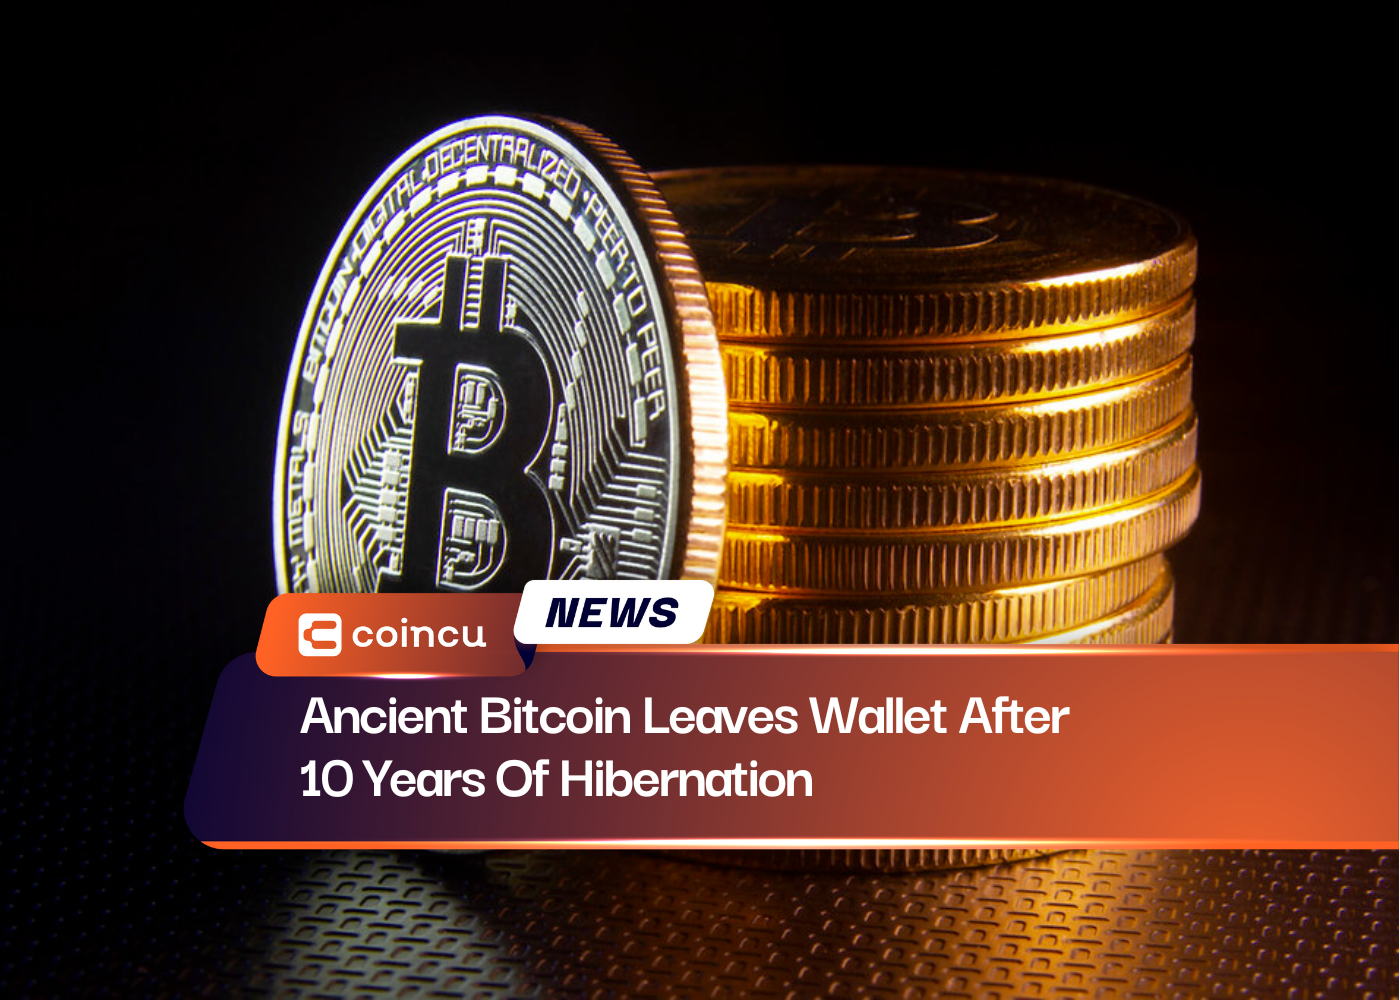 Ancient Bitcoin Leaves Wallet After 10 Years Of Hibernation